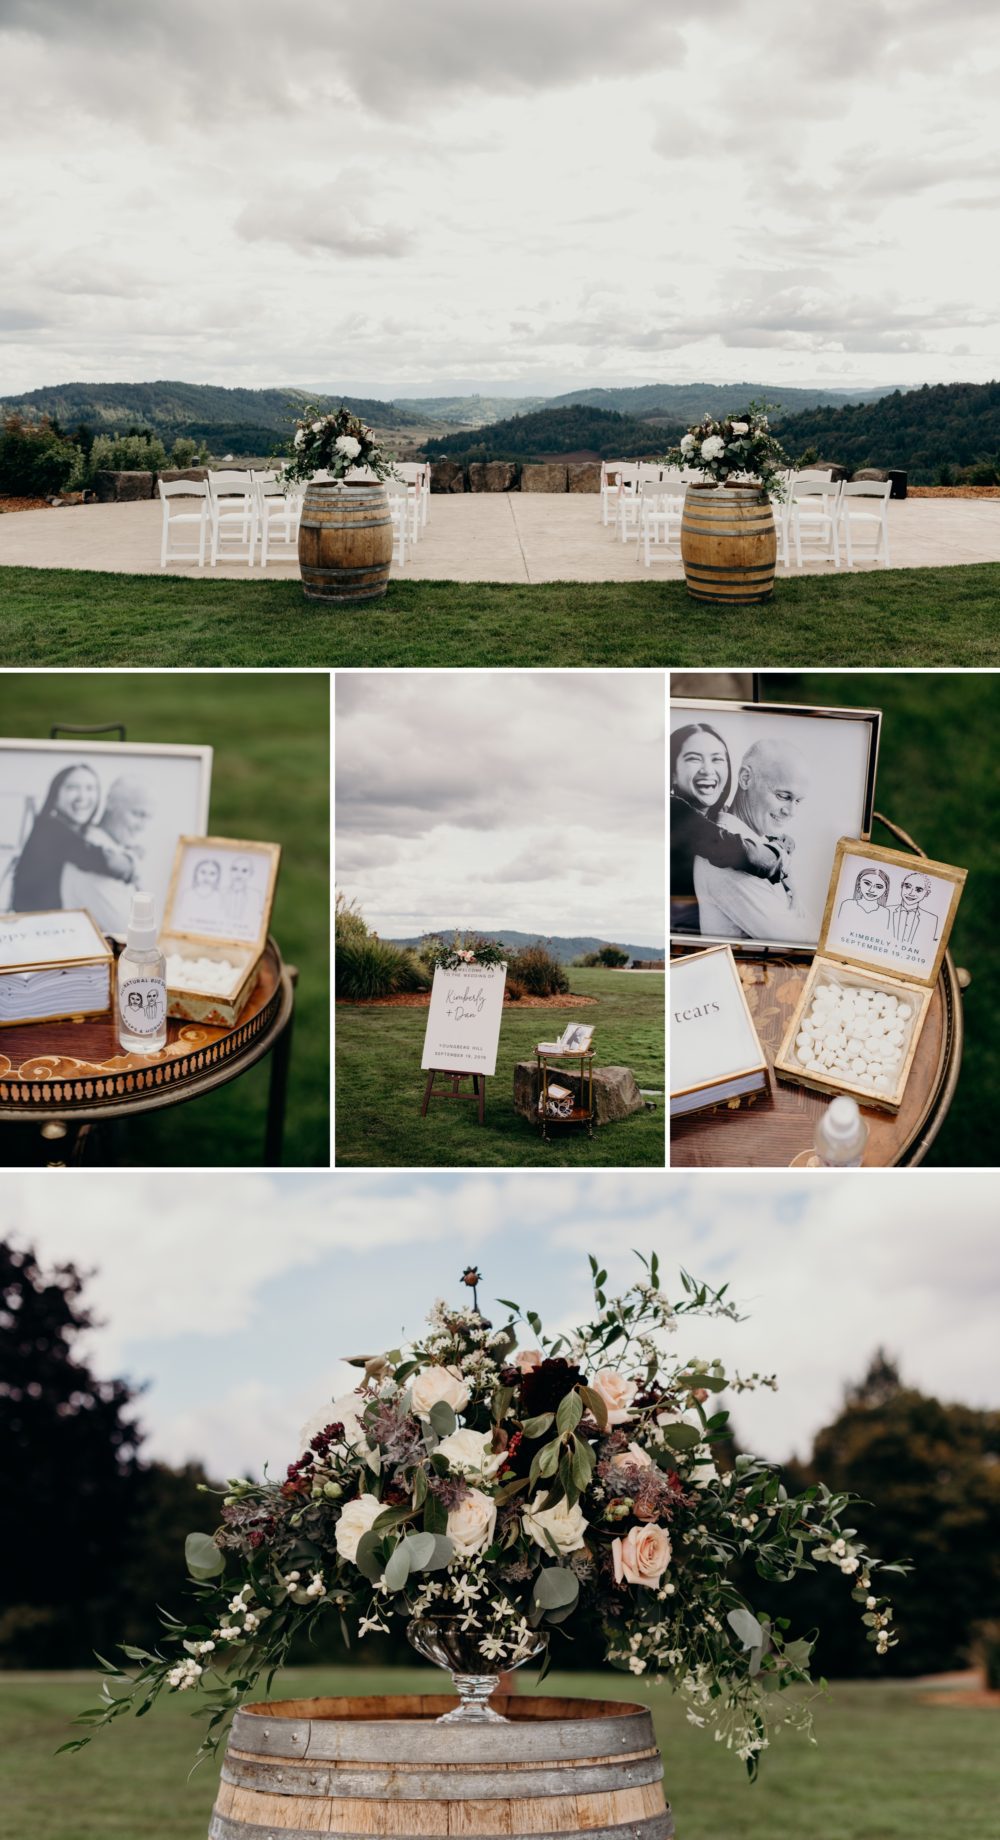 Ceremony details - by Youngberg Hill Wedding Photographer, Briana Morrison